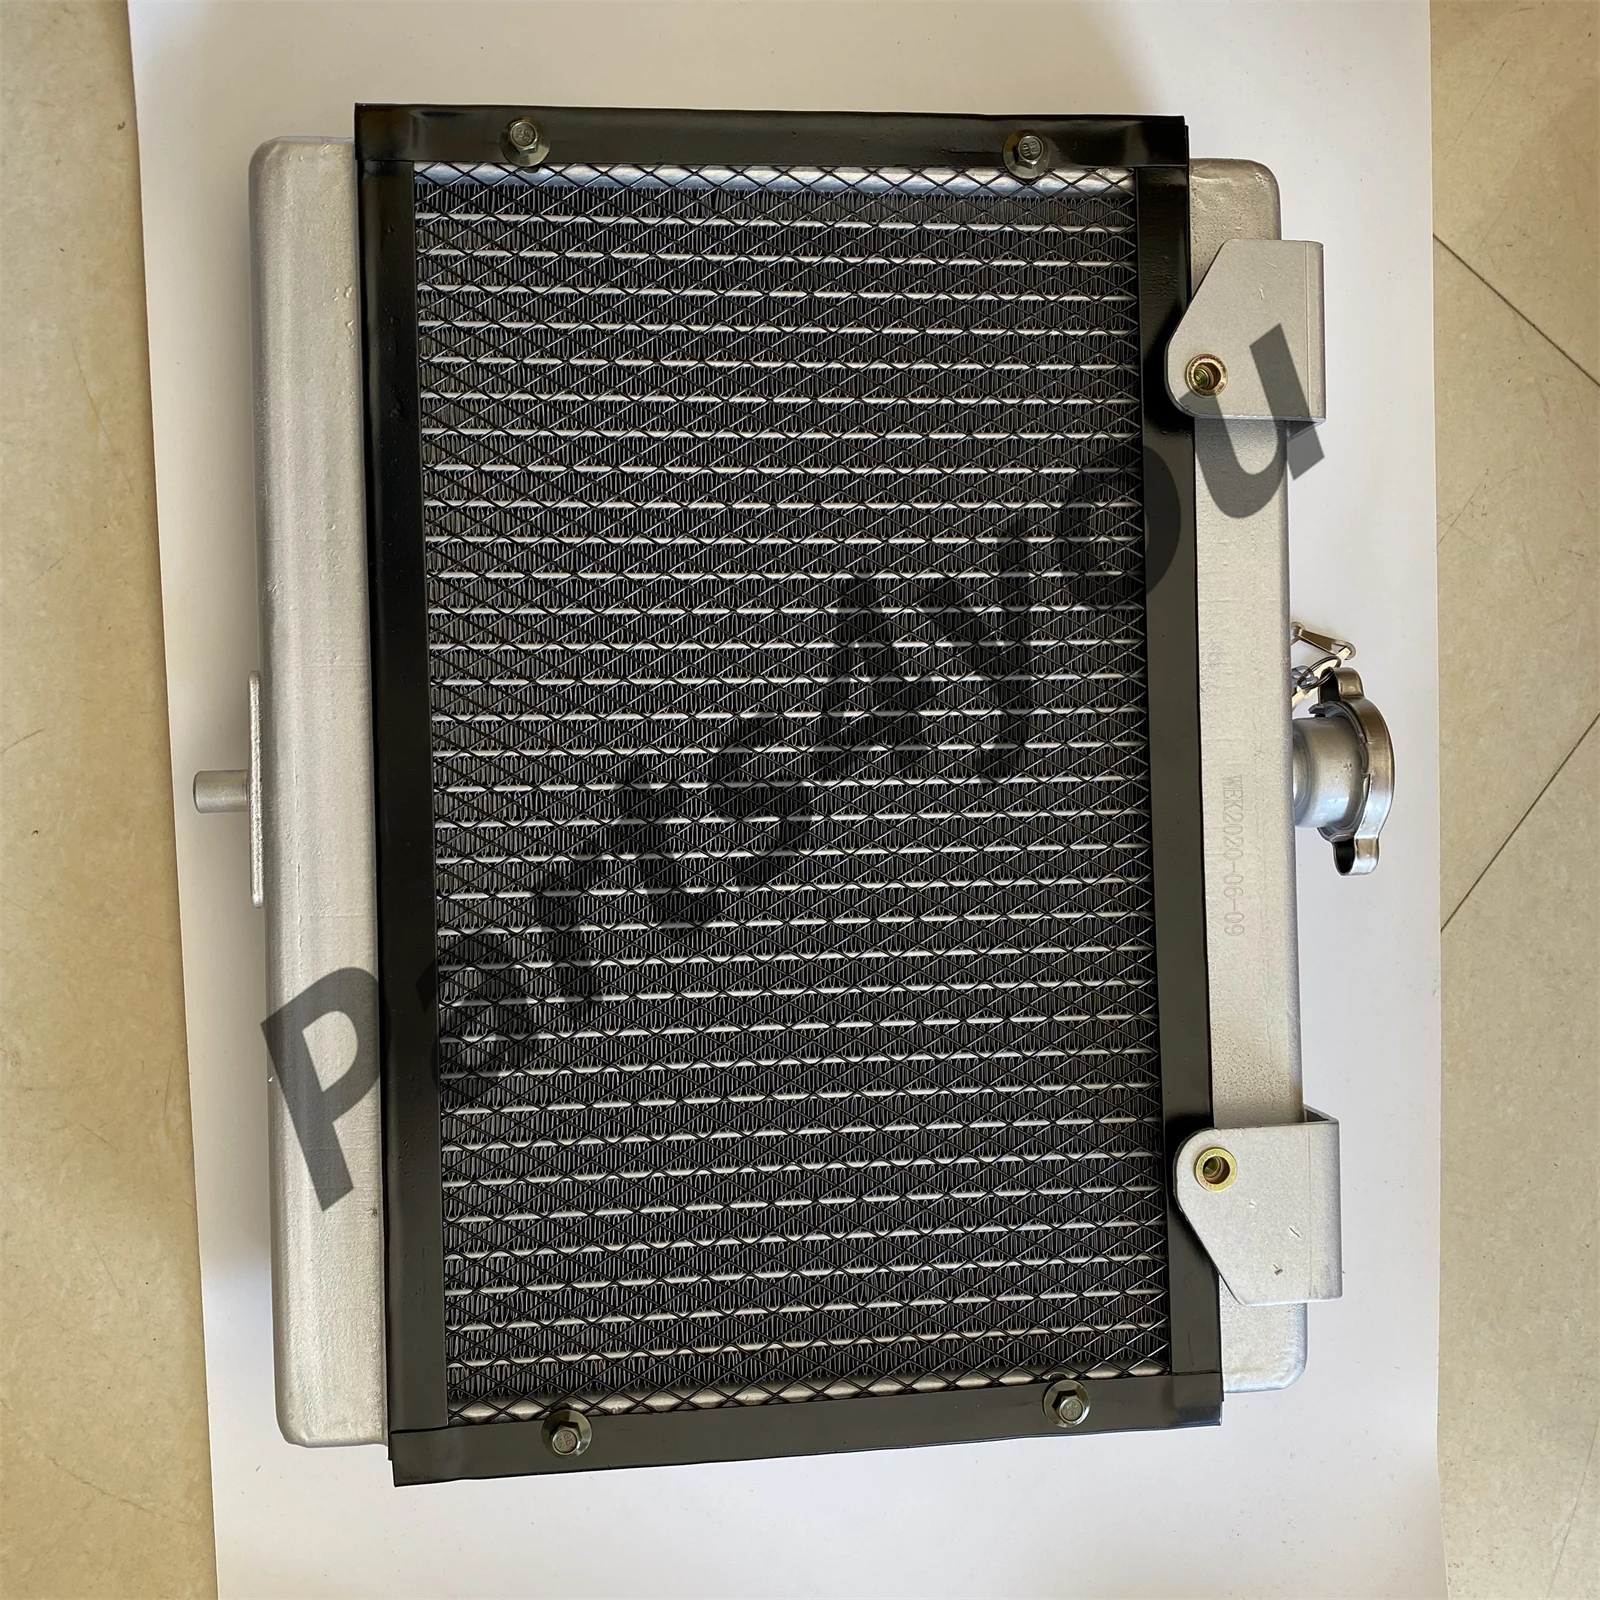 Radiator Water Tank for Goes 520 Goes 520 Max Goes 525 Goes 525 Max Goes 625i Goes 625i Max